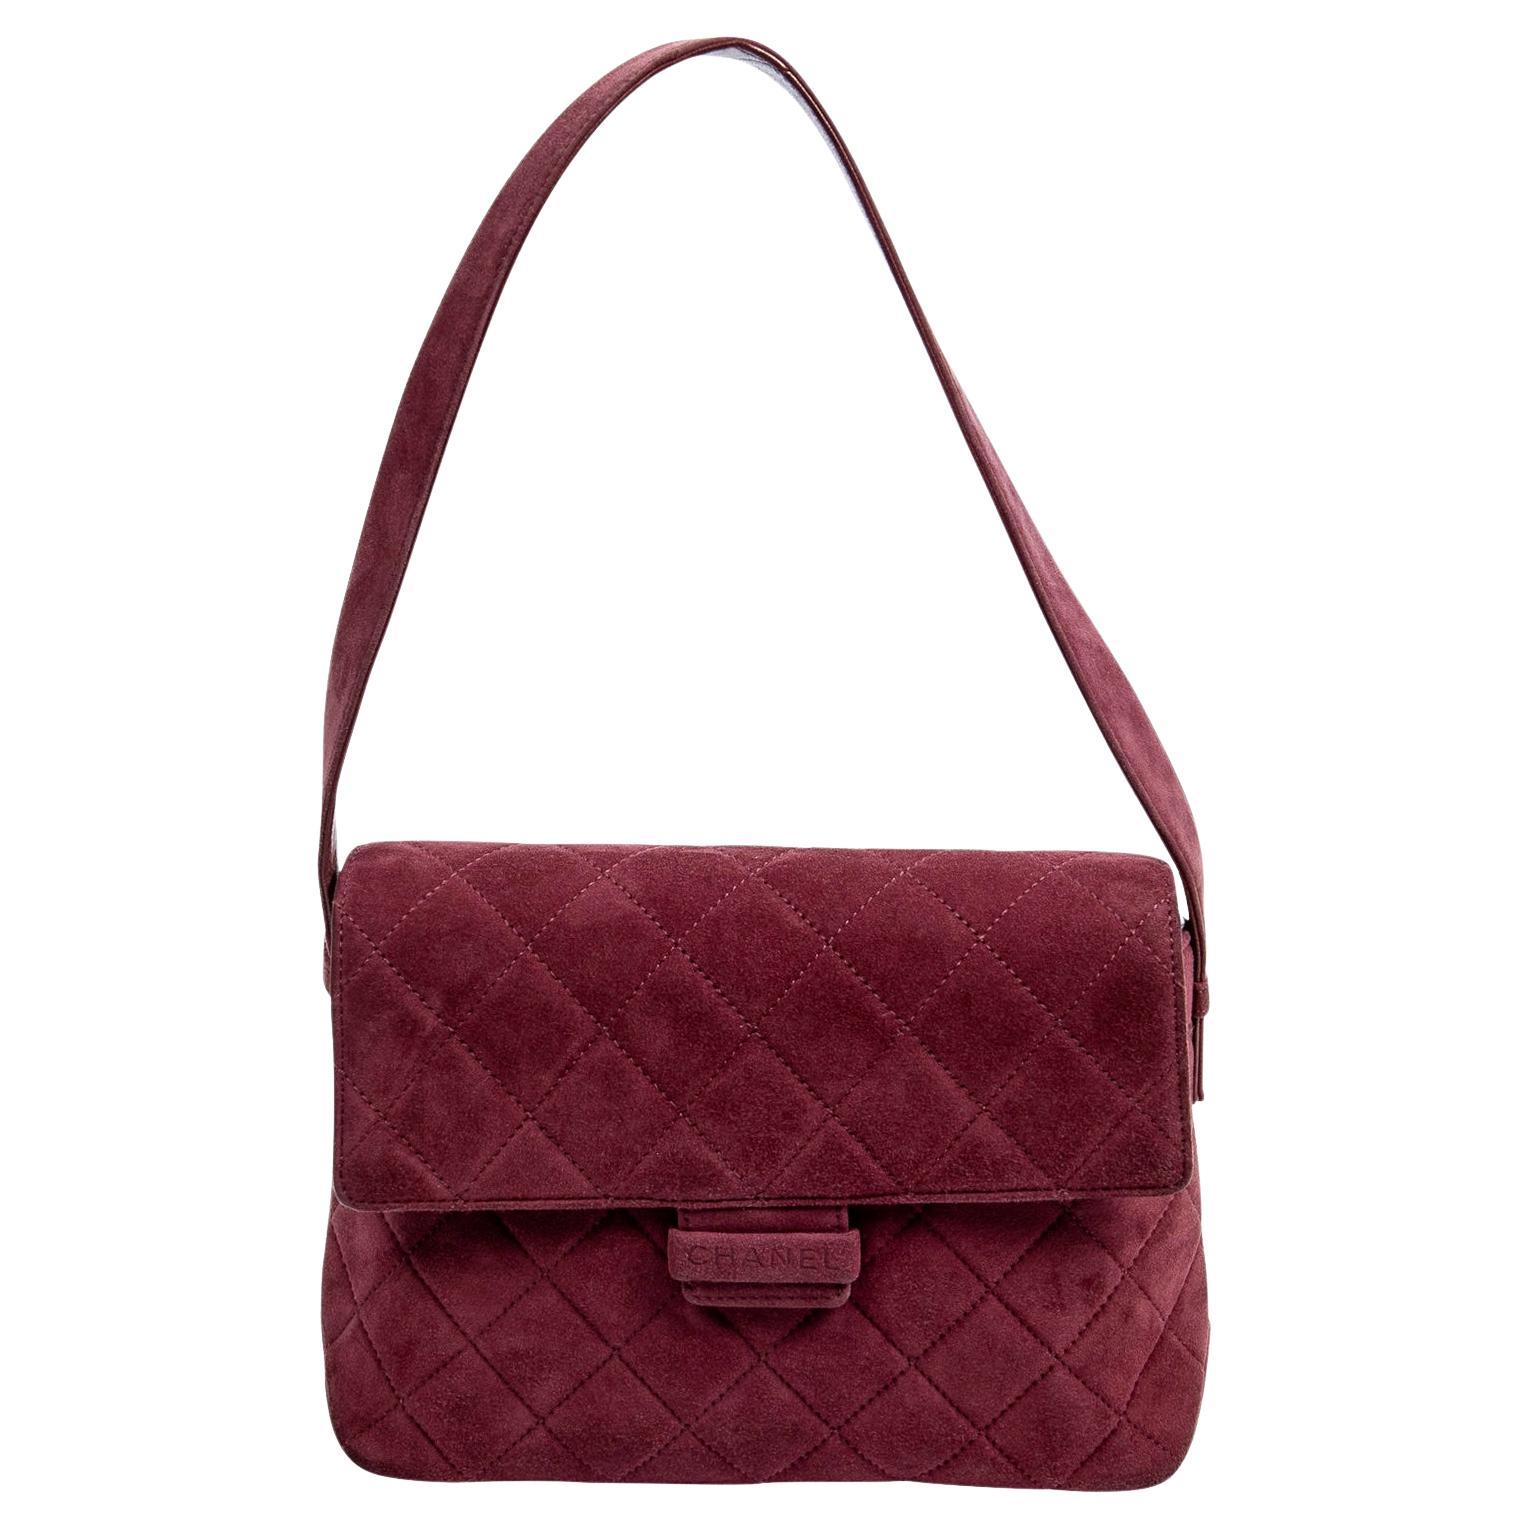 Chanel Burgundy Suede Logo Quilted Flap Bag For Sale